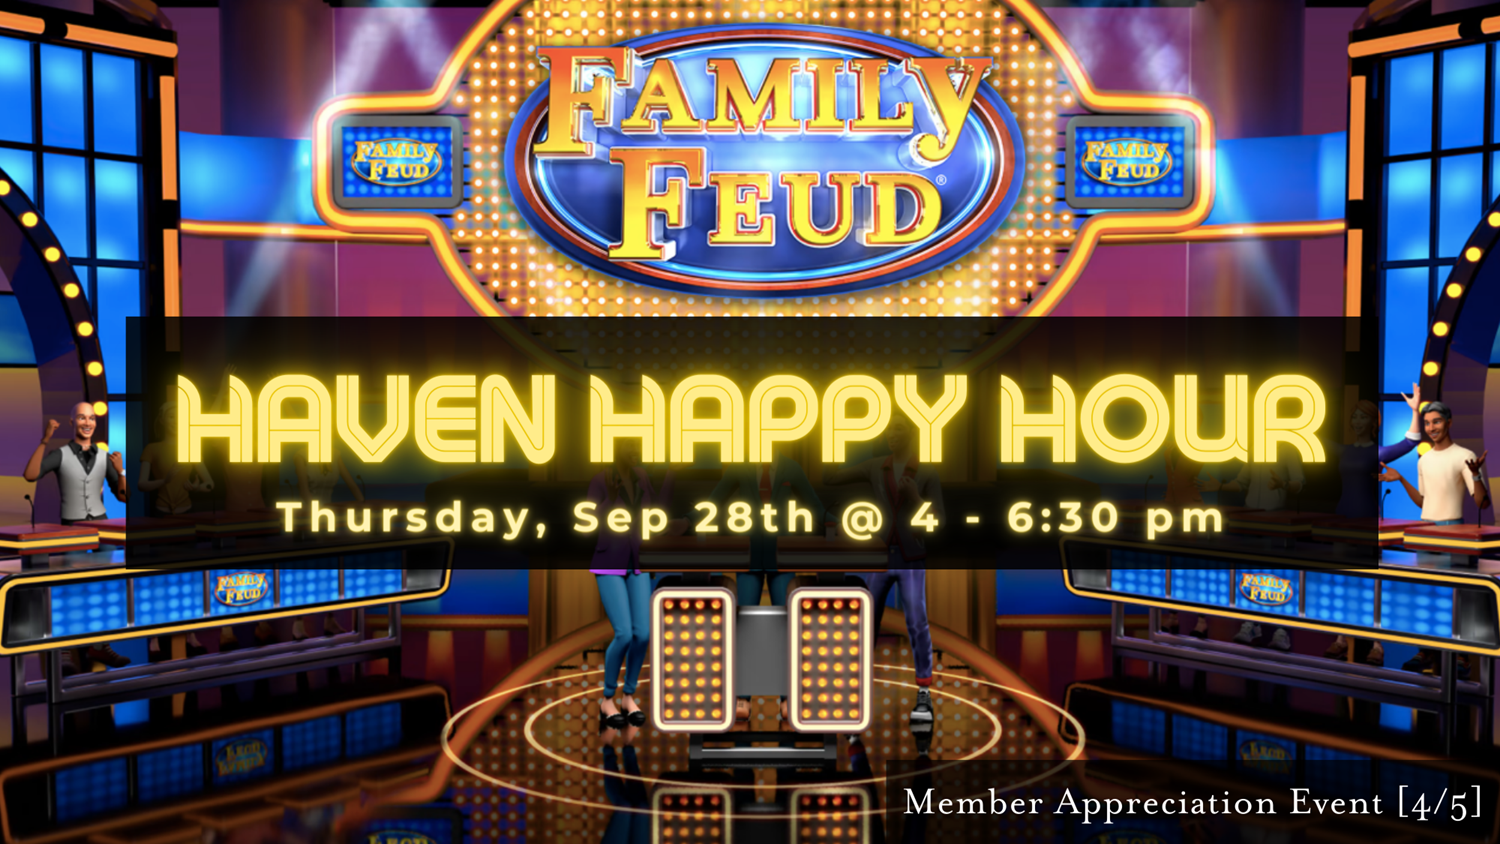 Family Feud Themed Happy Hour